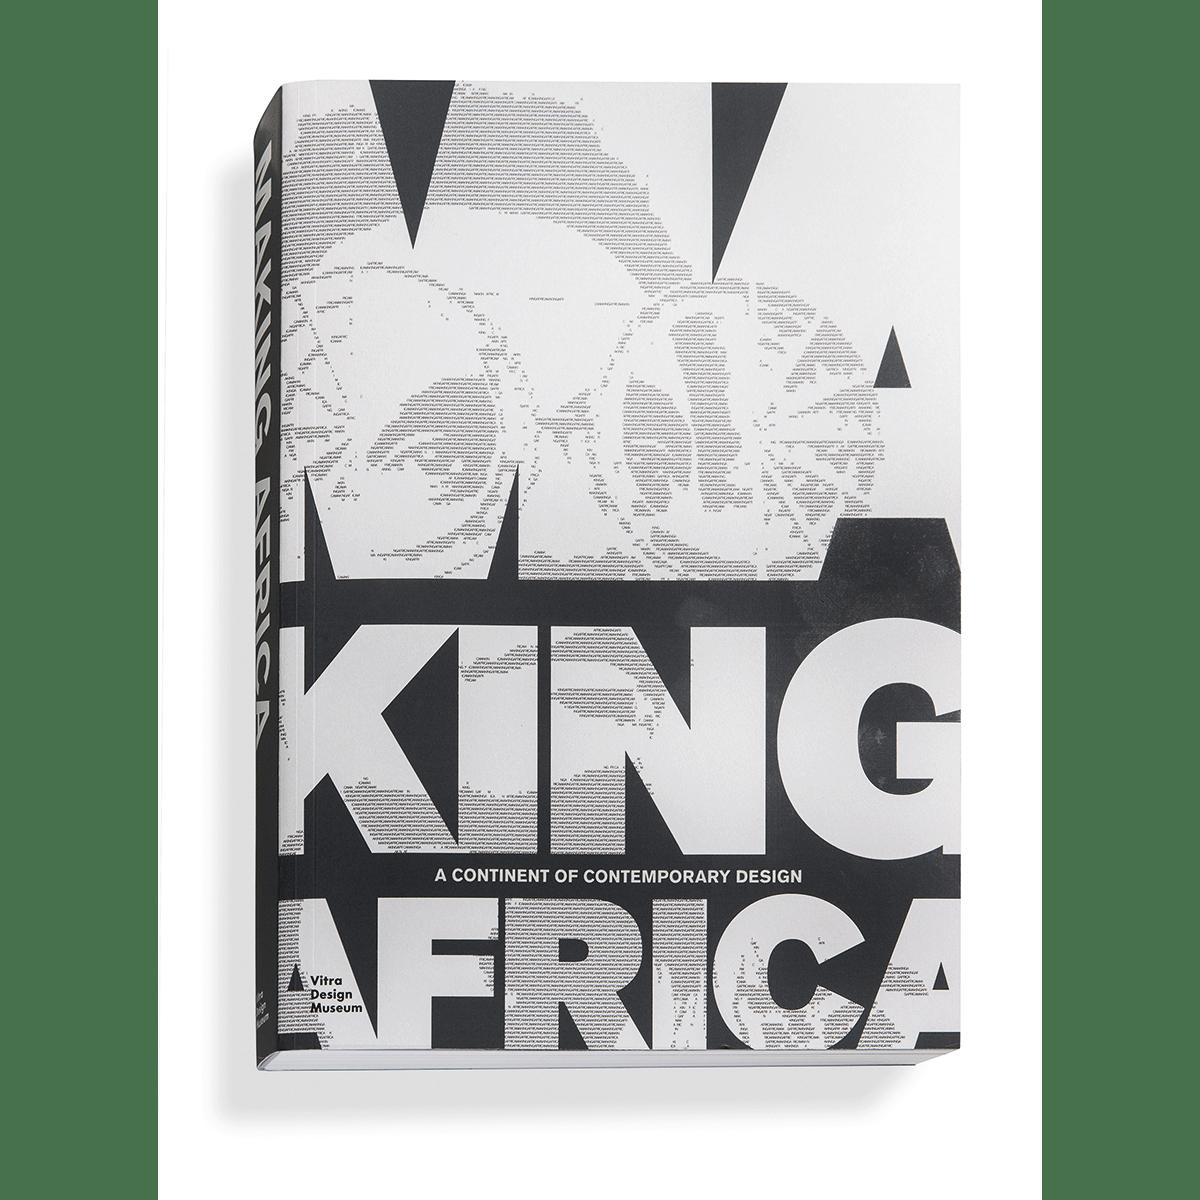 Making Africa. A Continent of Contemporary Design. - Mateo Kries